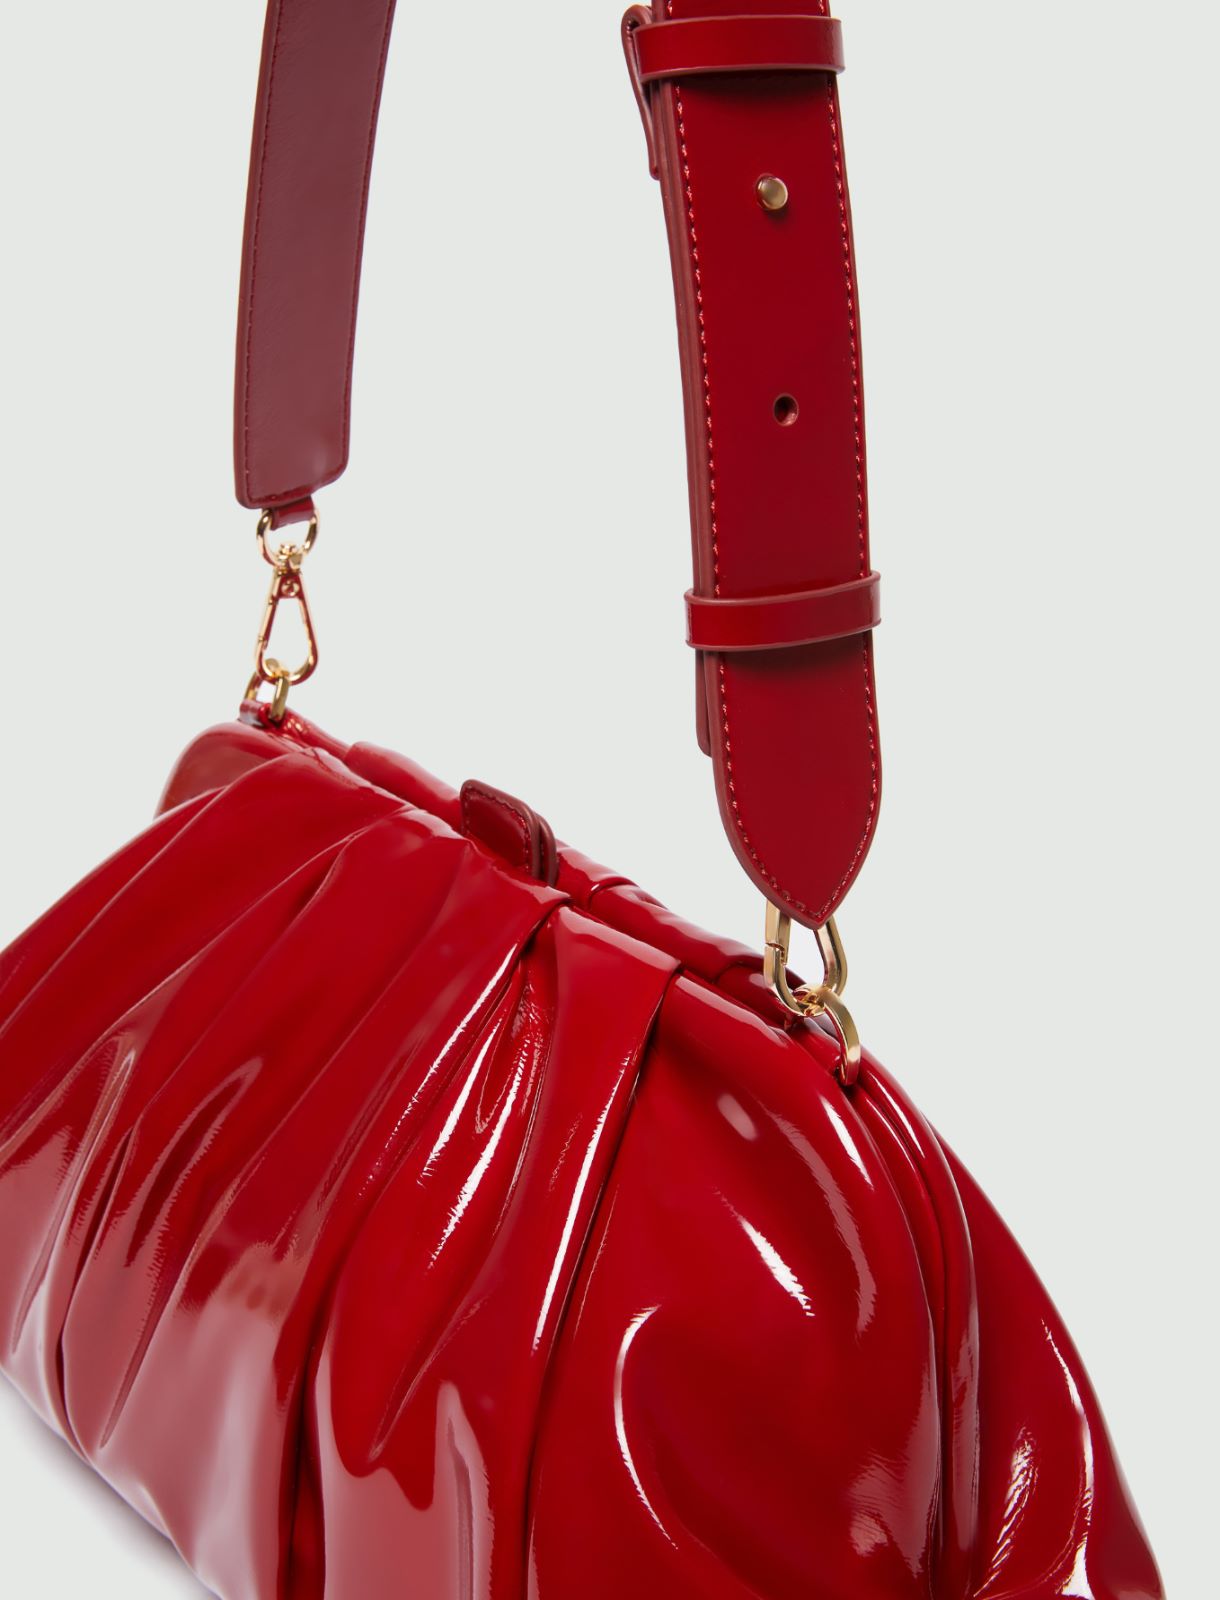 Patent leather bag - Red - Marella - 3